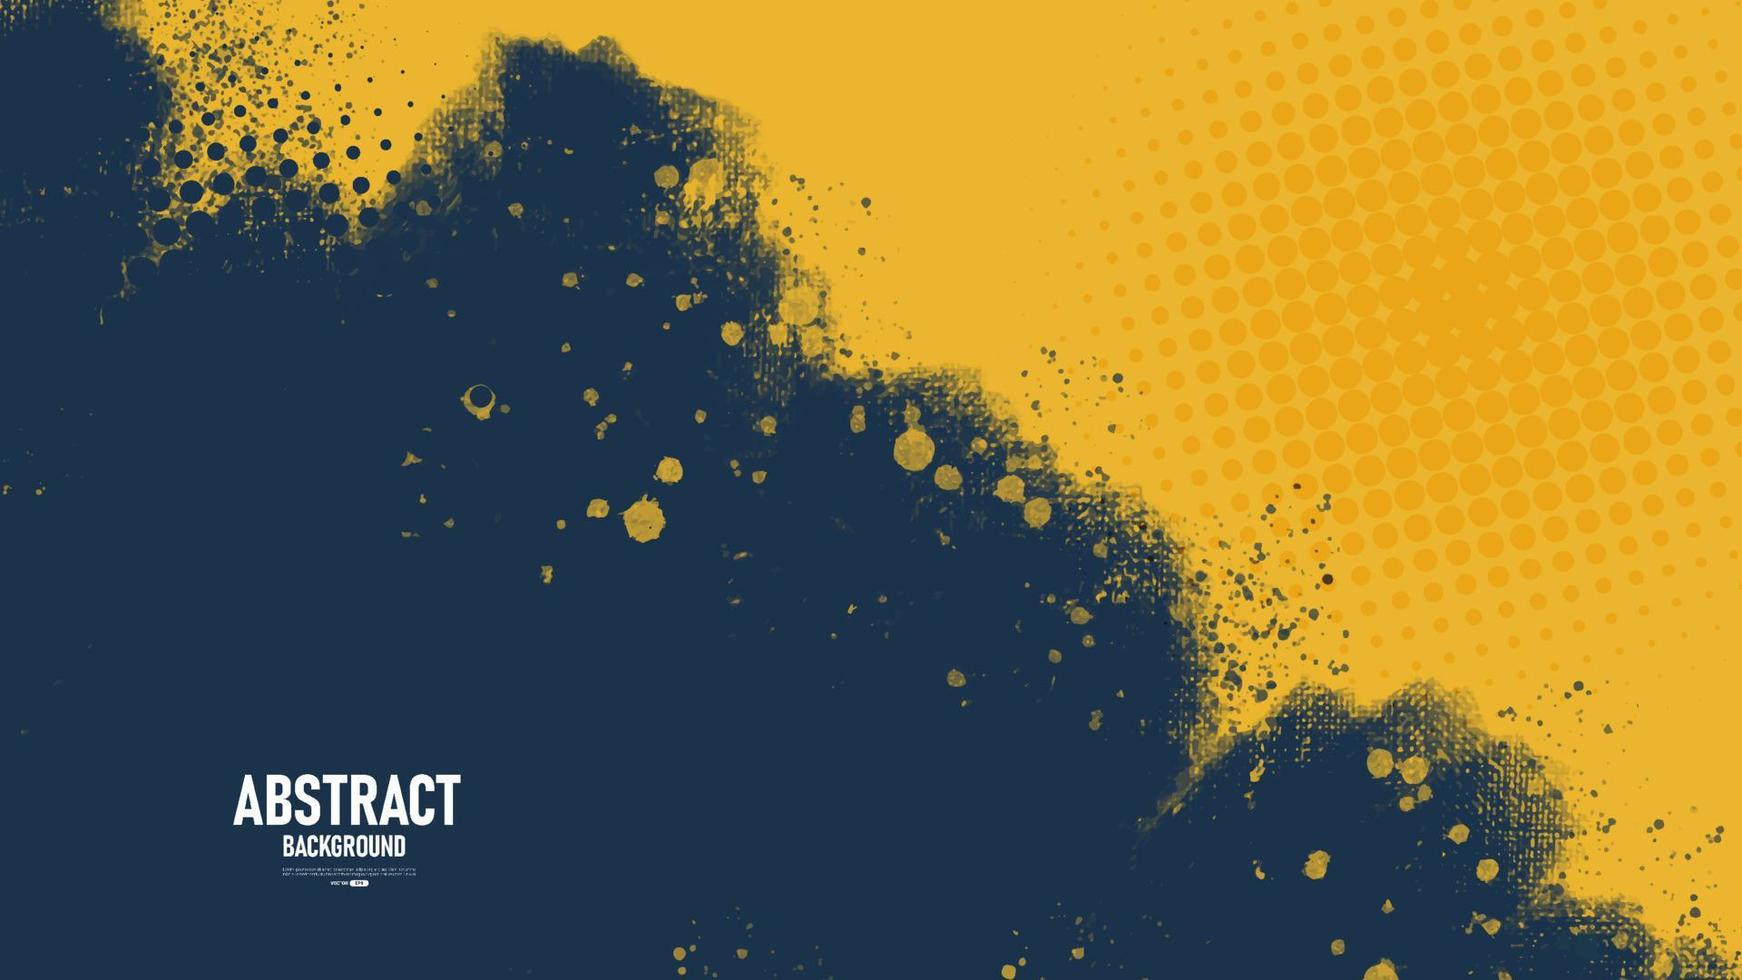 Abstract dark blue and yellow grunge texture background vector